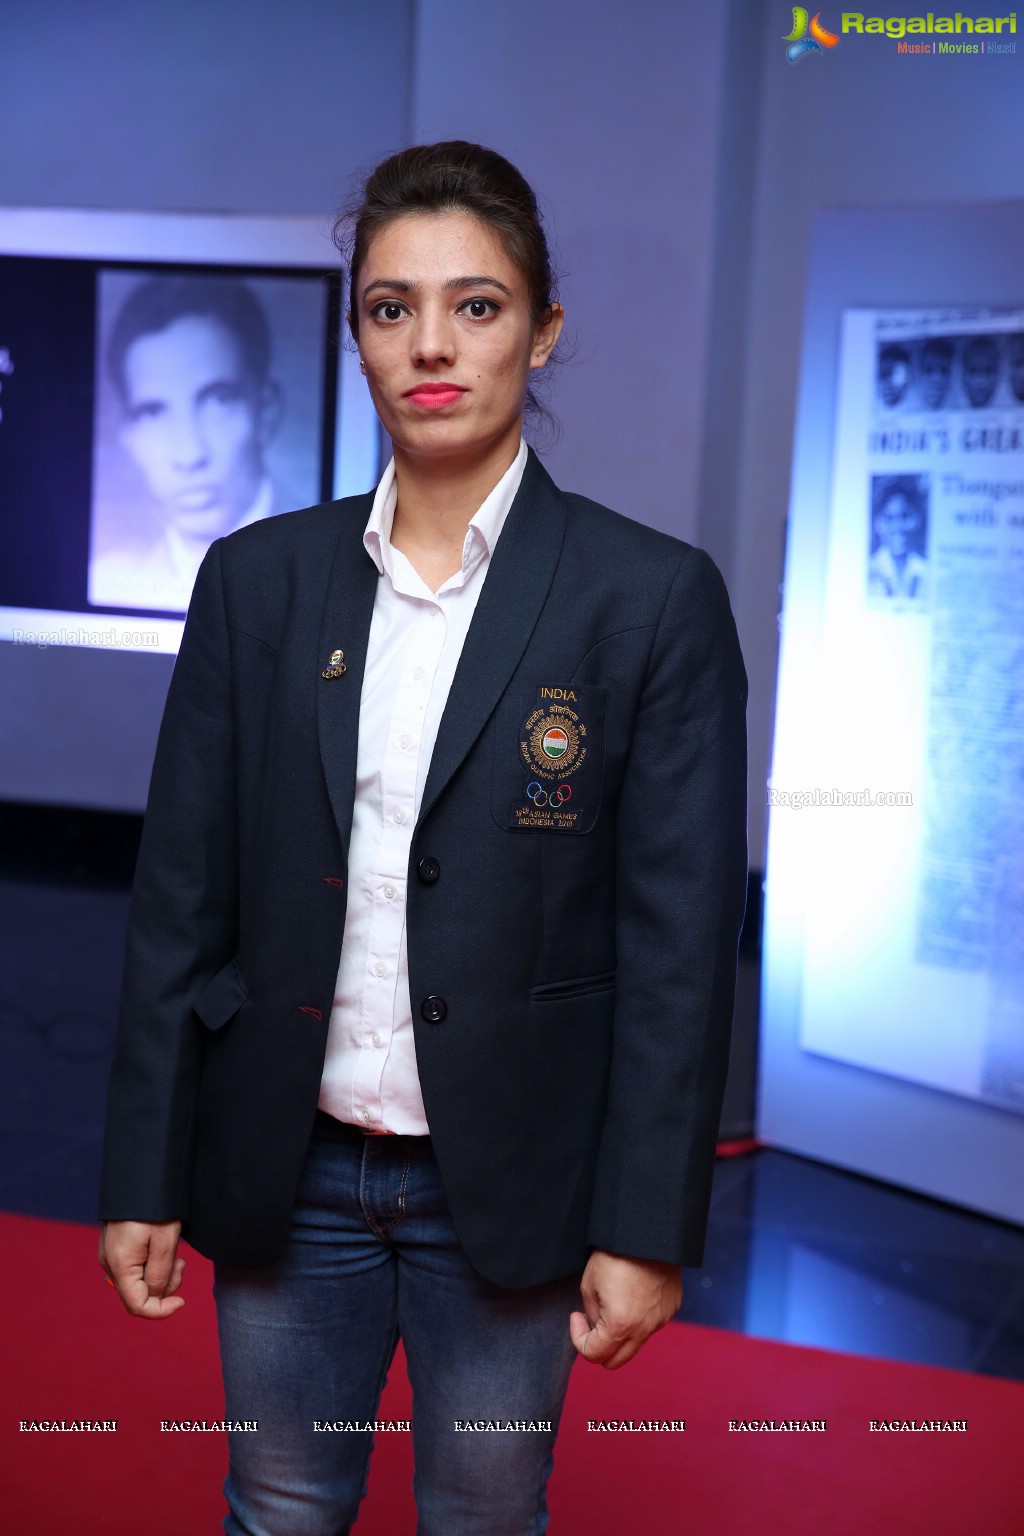 Awards Night - City of Heroes-Recognizing the Efforts of Sporting Heroes of Hyderabad